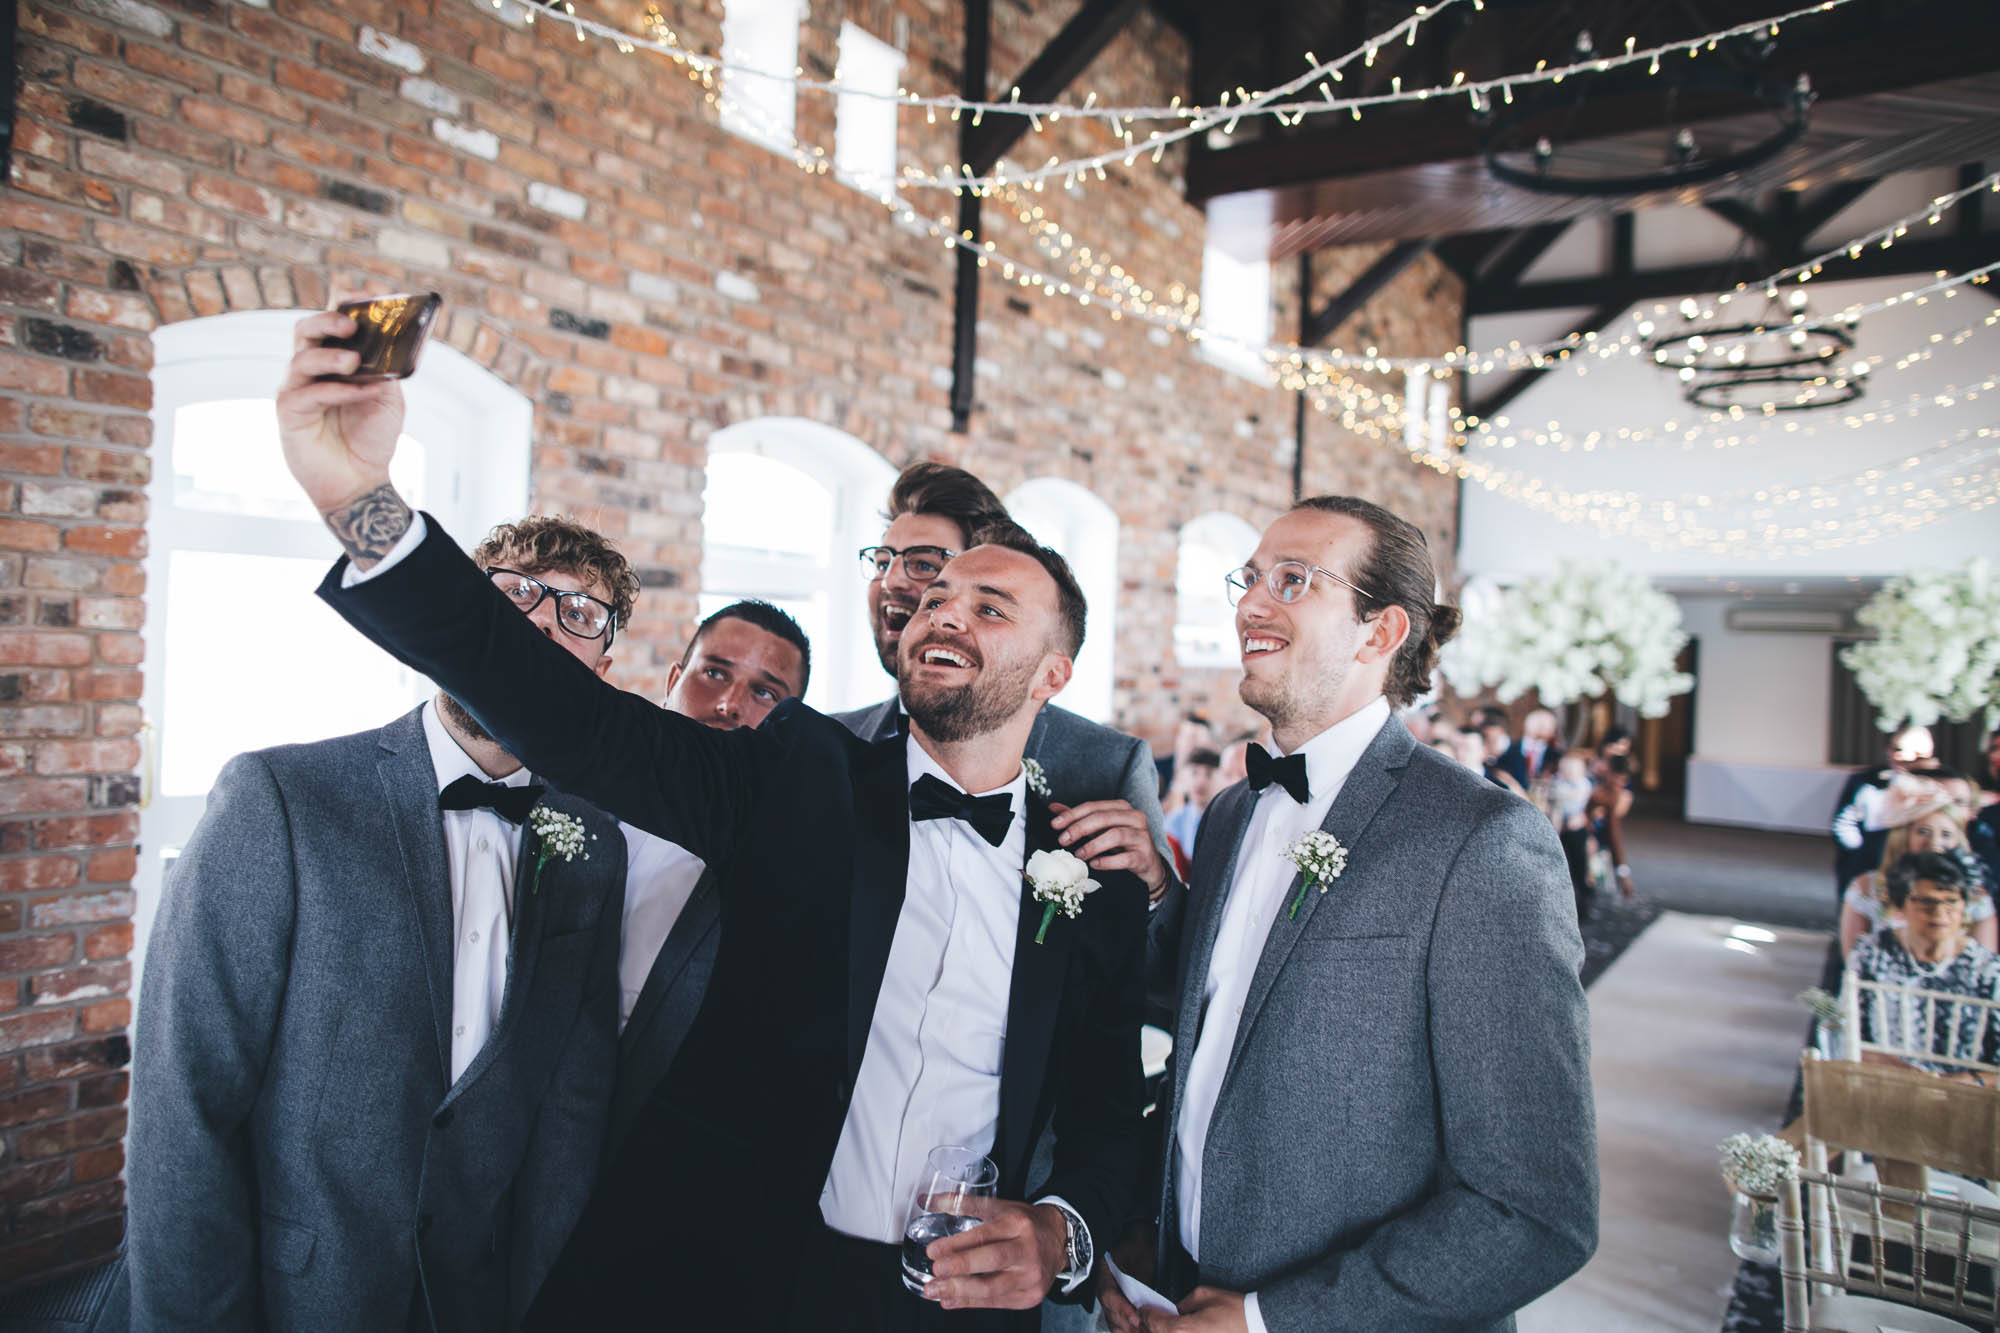 Groom taking a selfie with Best Man and Ushers just before the wedding ceremony